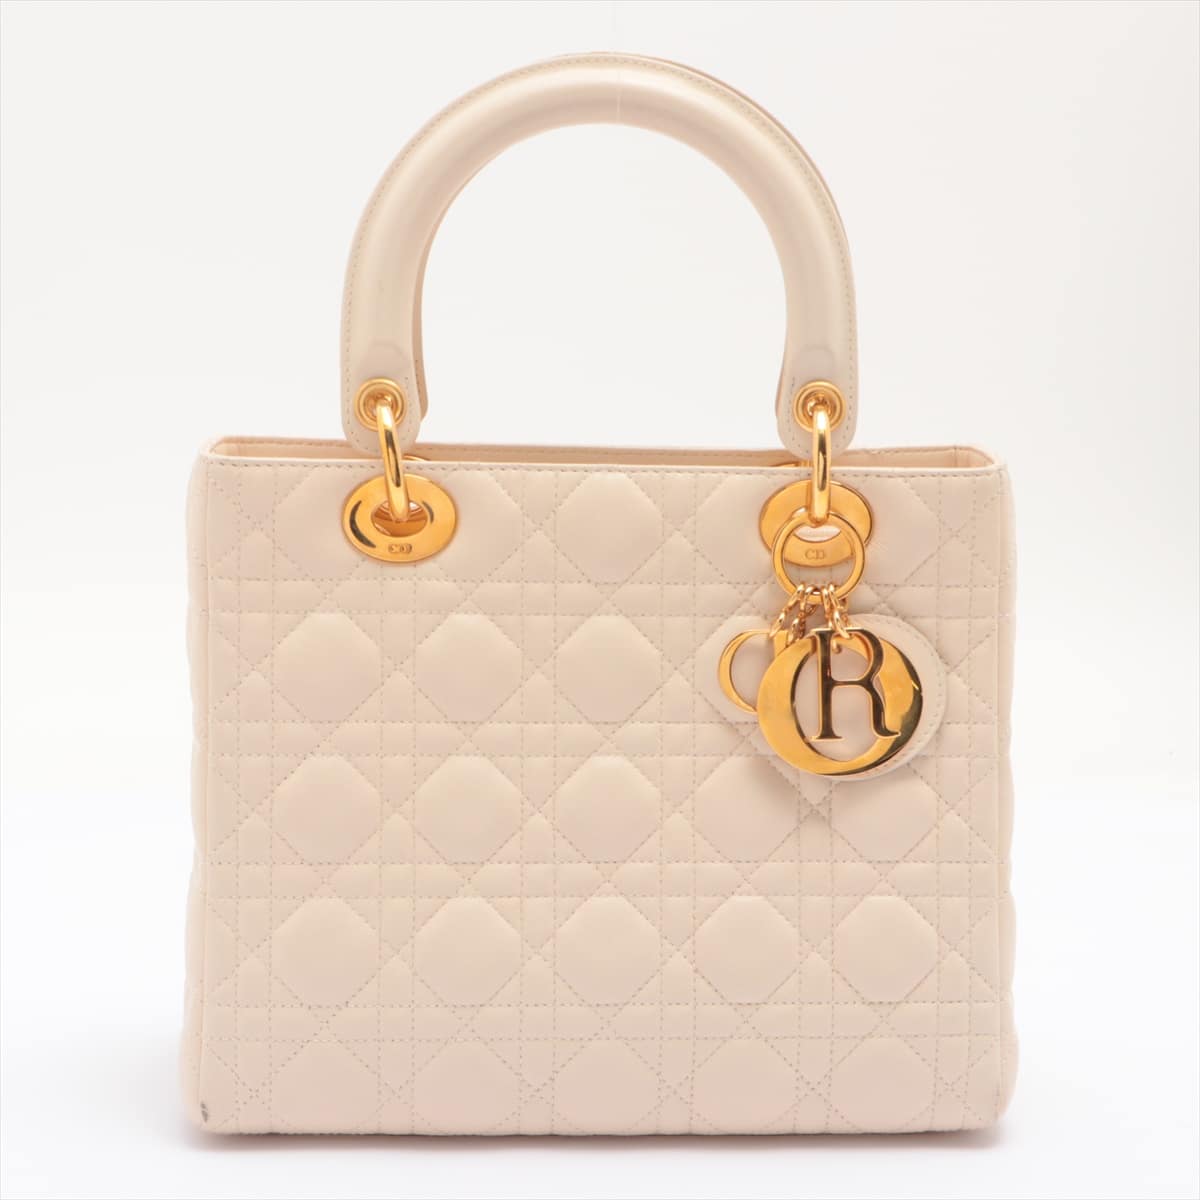 Christian Dior Lady Dior Cannage Leather 2way handbag Ivory open papers